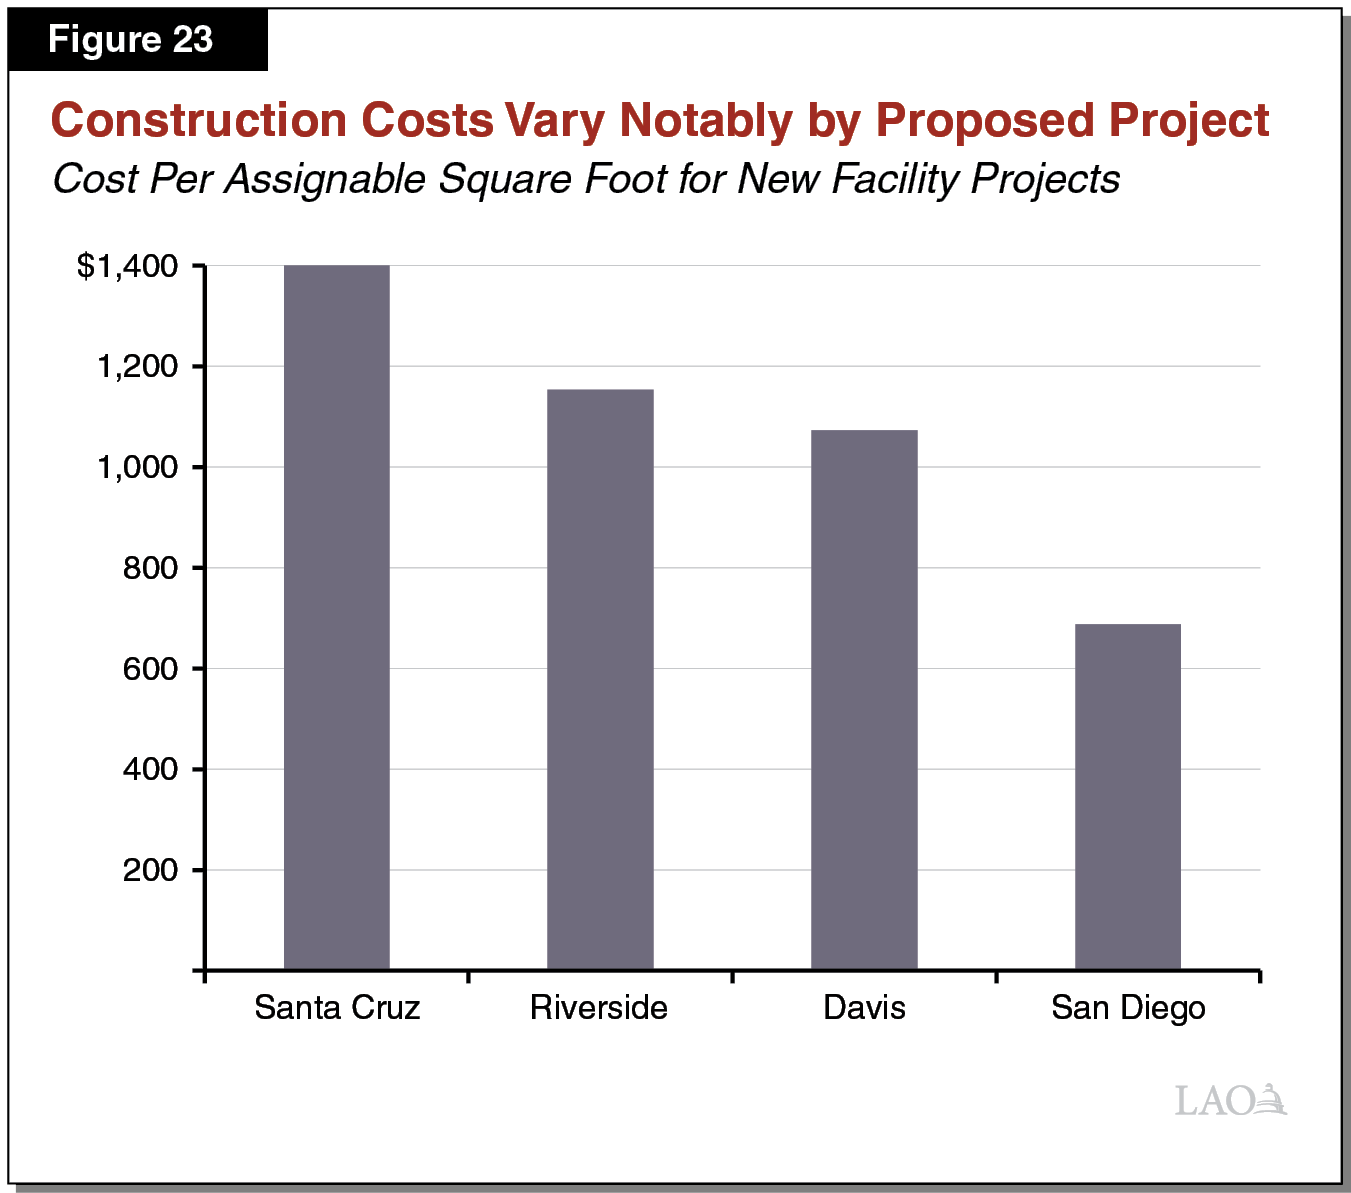 Figure 23 - Construction Costs Vary Notably by Proposed Project